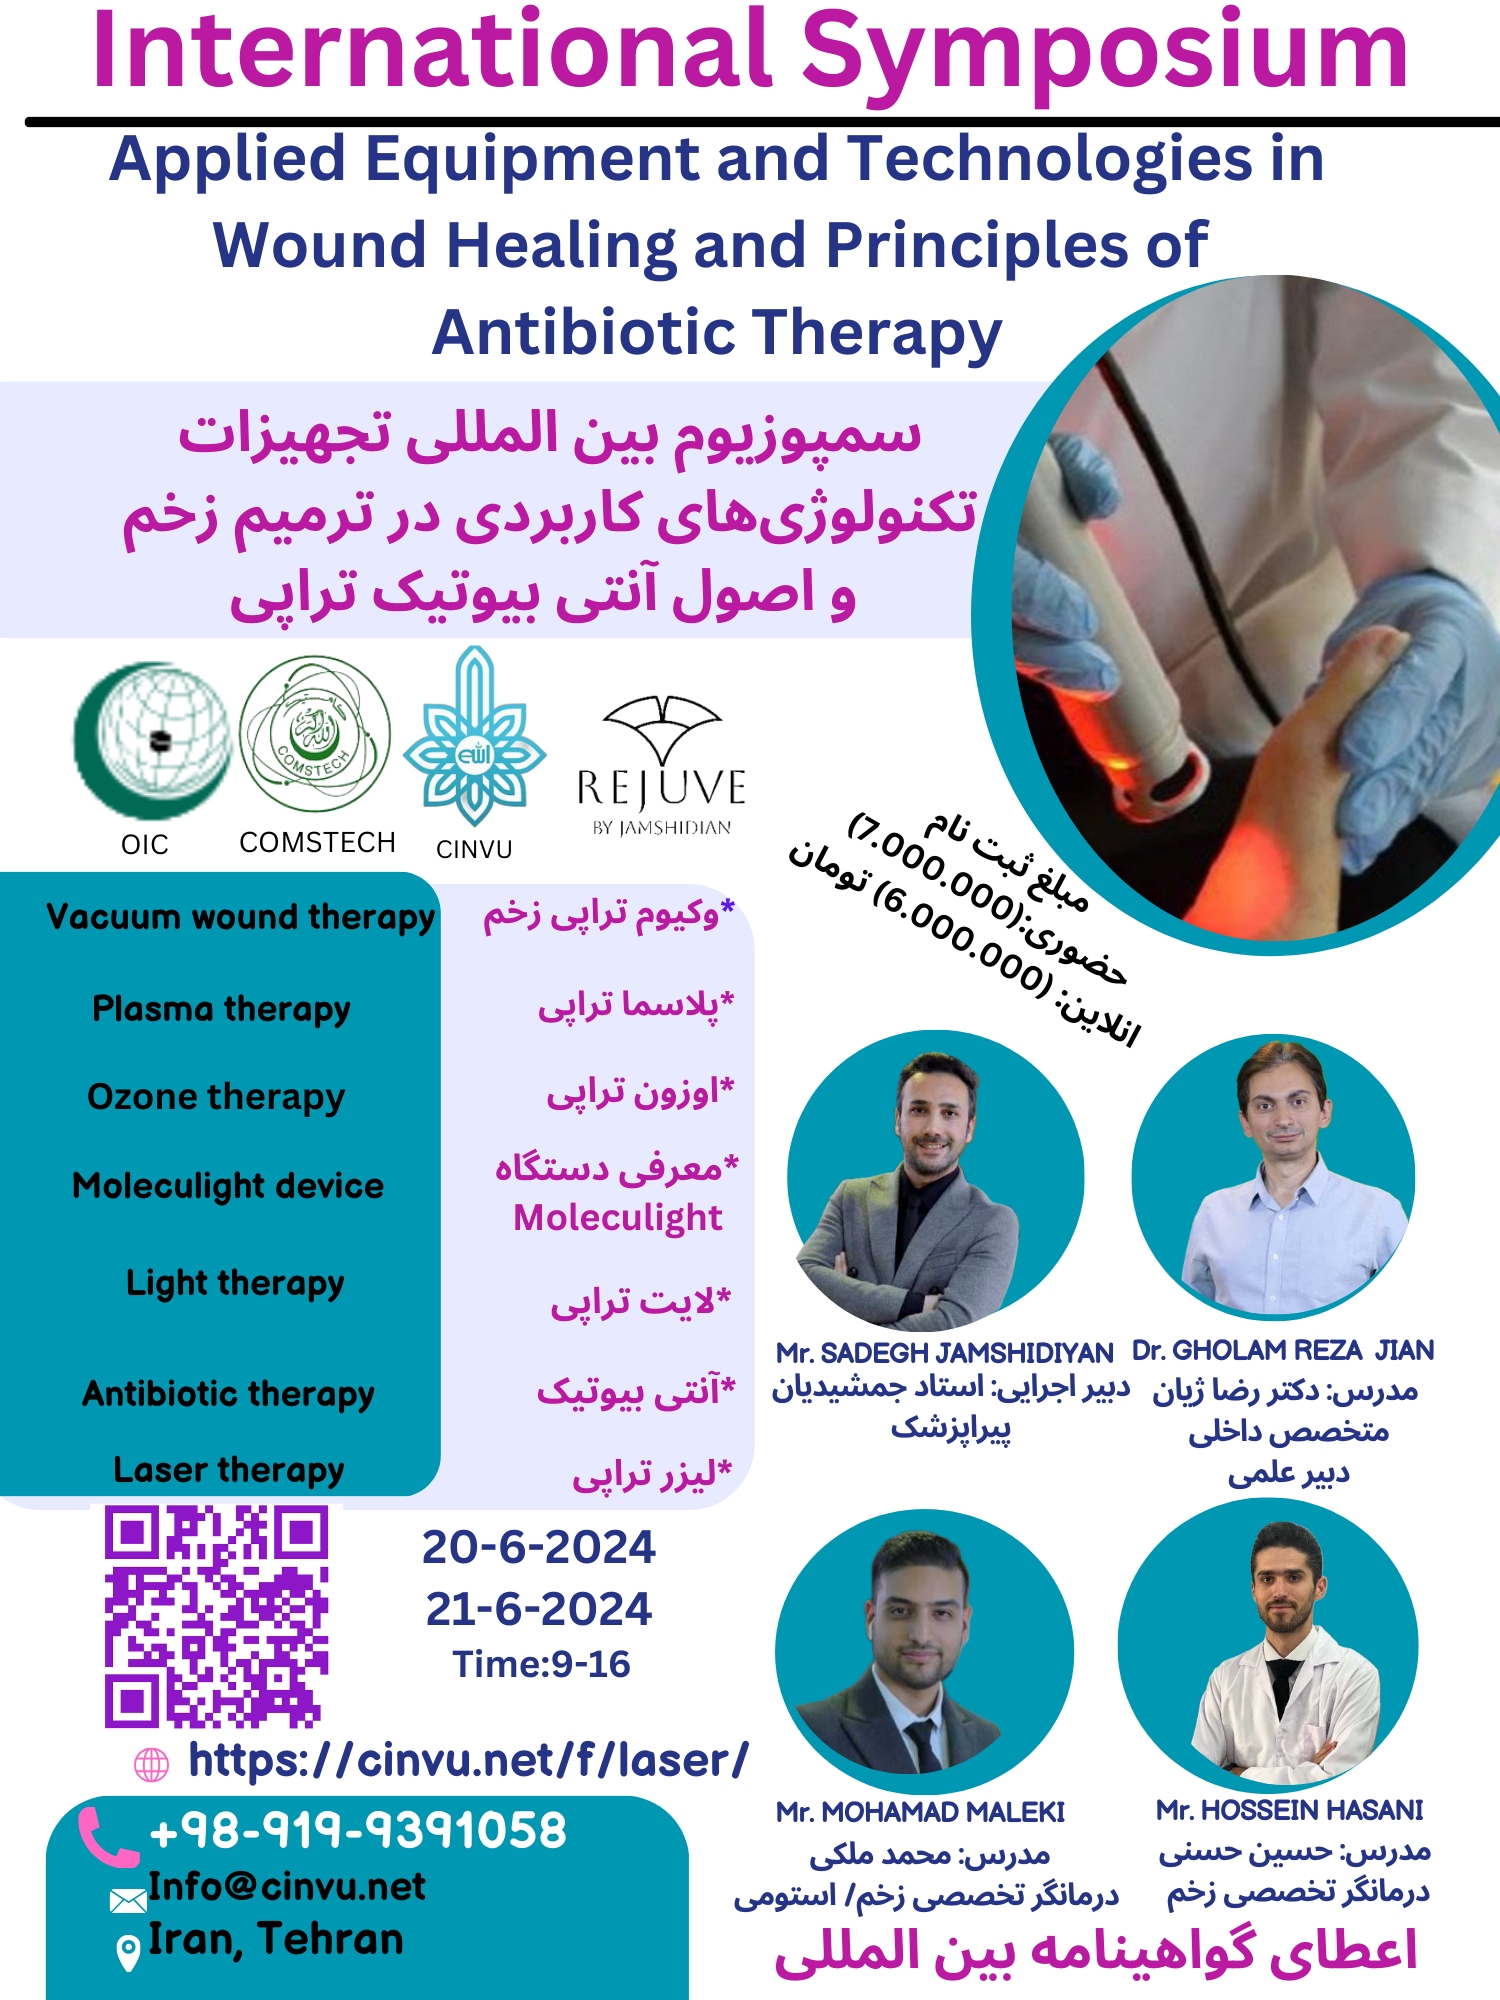 International Symposium on Applied Equipment and Technologies in Wound Healing and Principles of Antibiotic Therapy